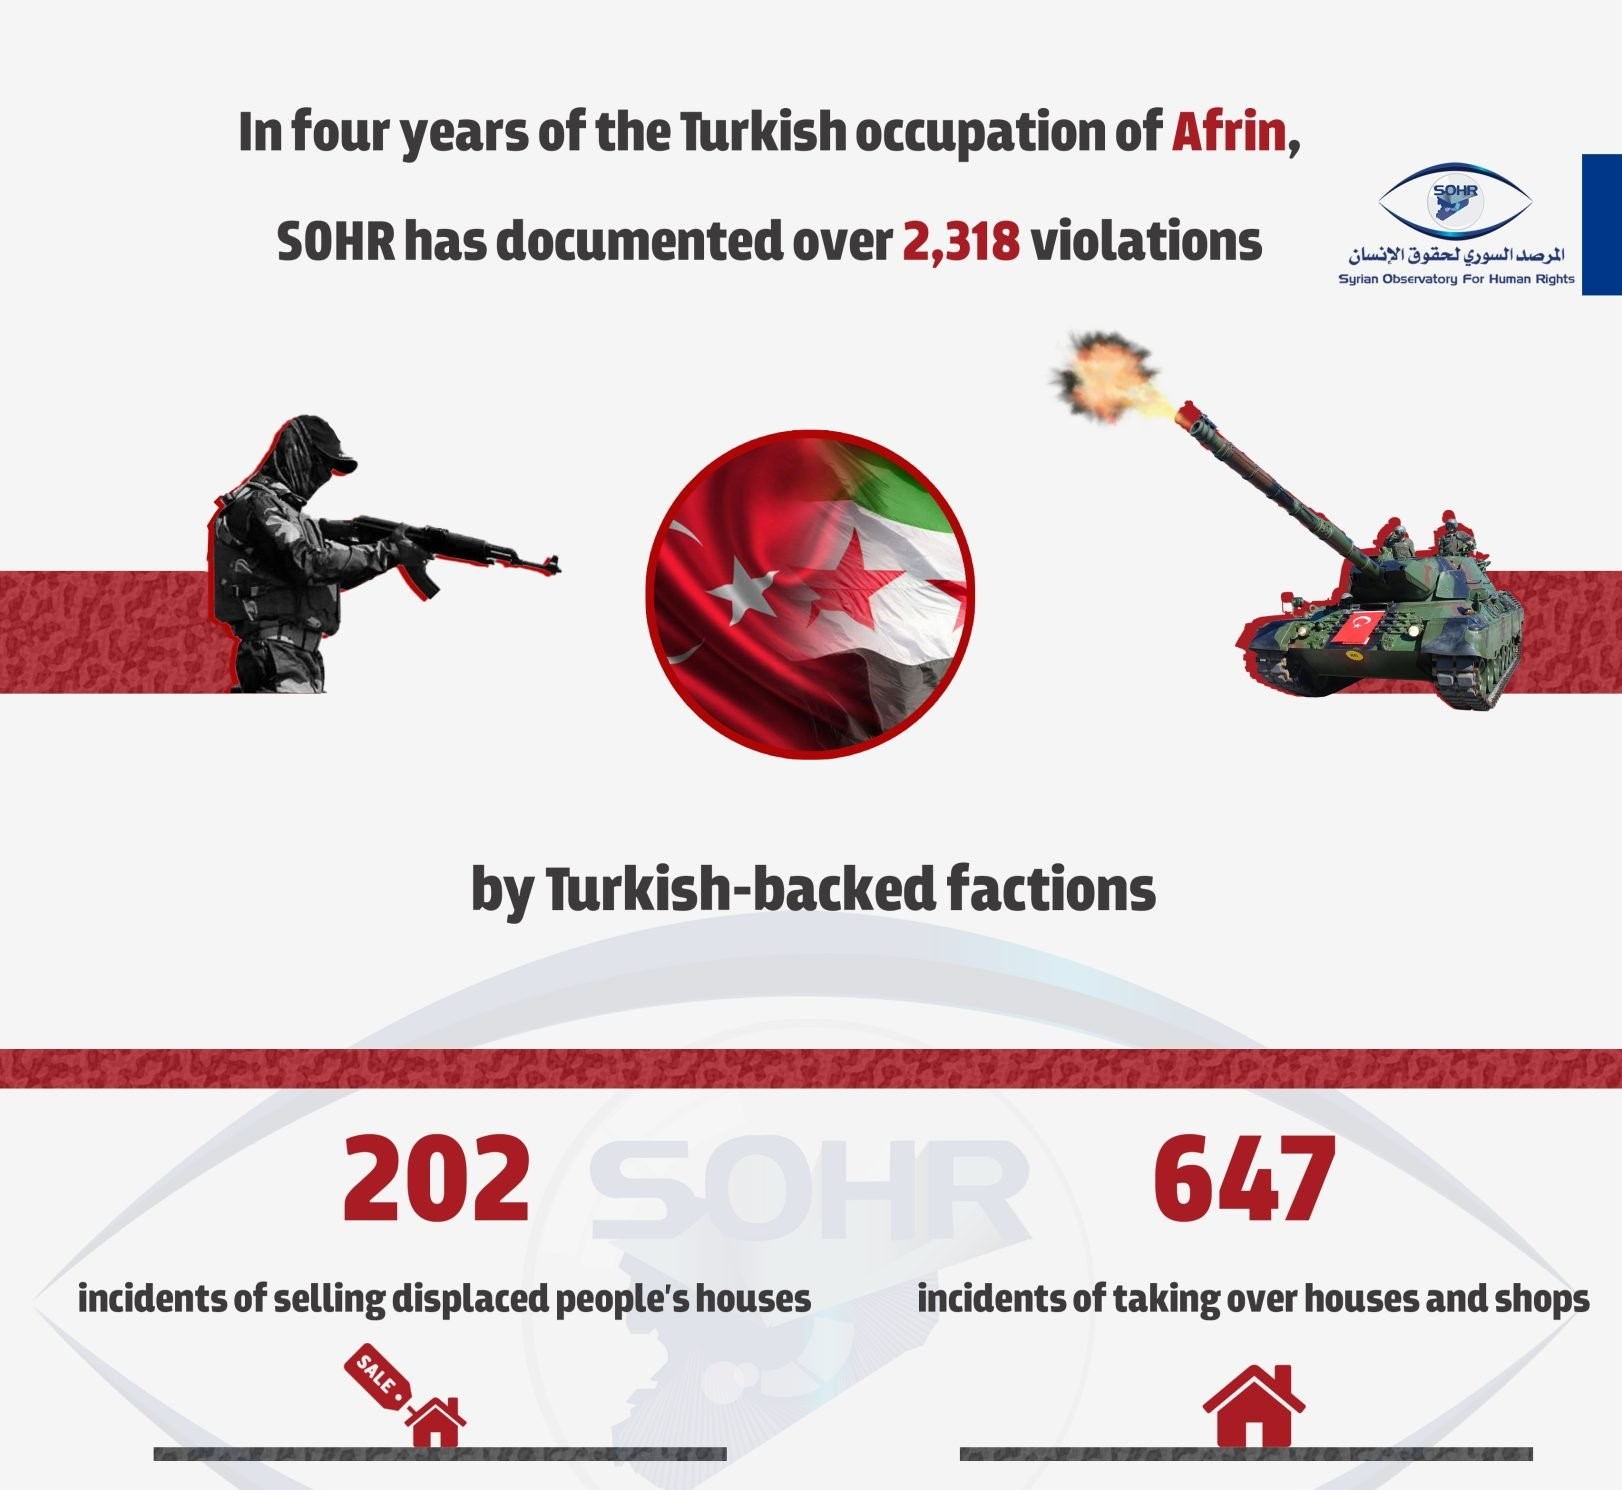 DrawMedia.net / In 4 years of the Turkish occupation of Afrin, (SOHR) has documented over 2,300 violations